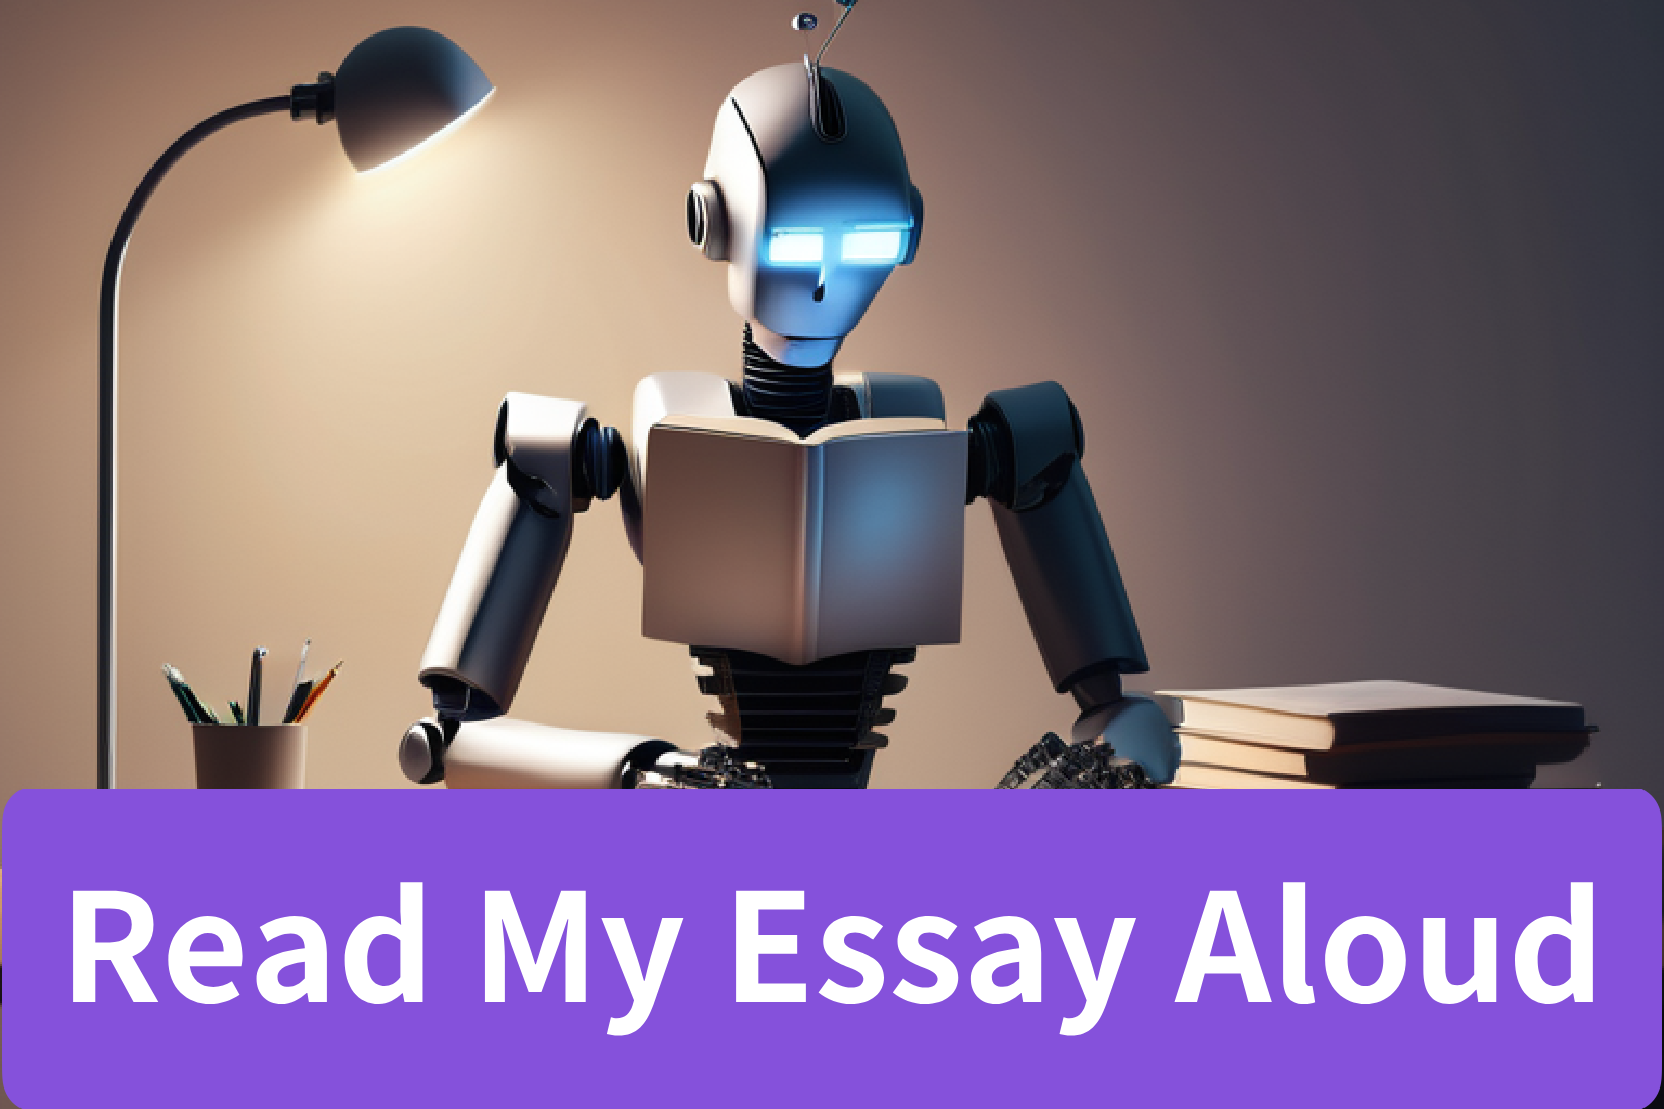 Read my essay aloud: Elevating Educational Support with Text-to-Speech AI